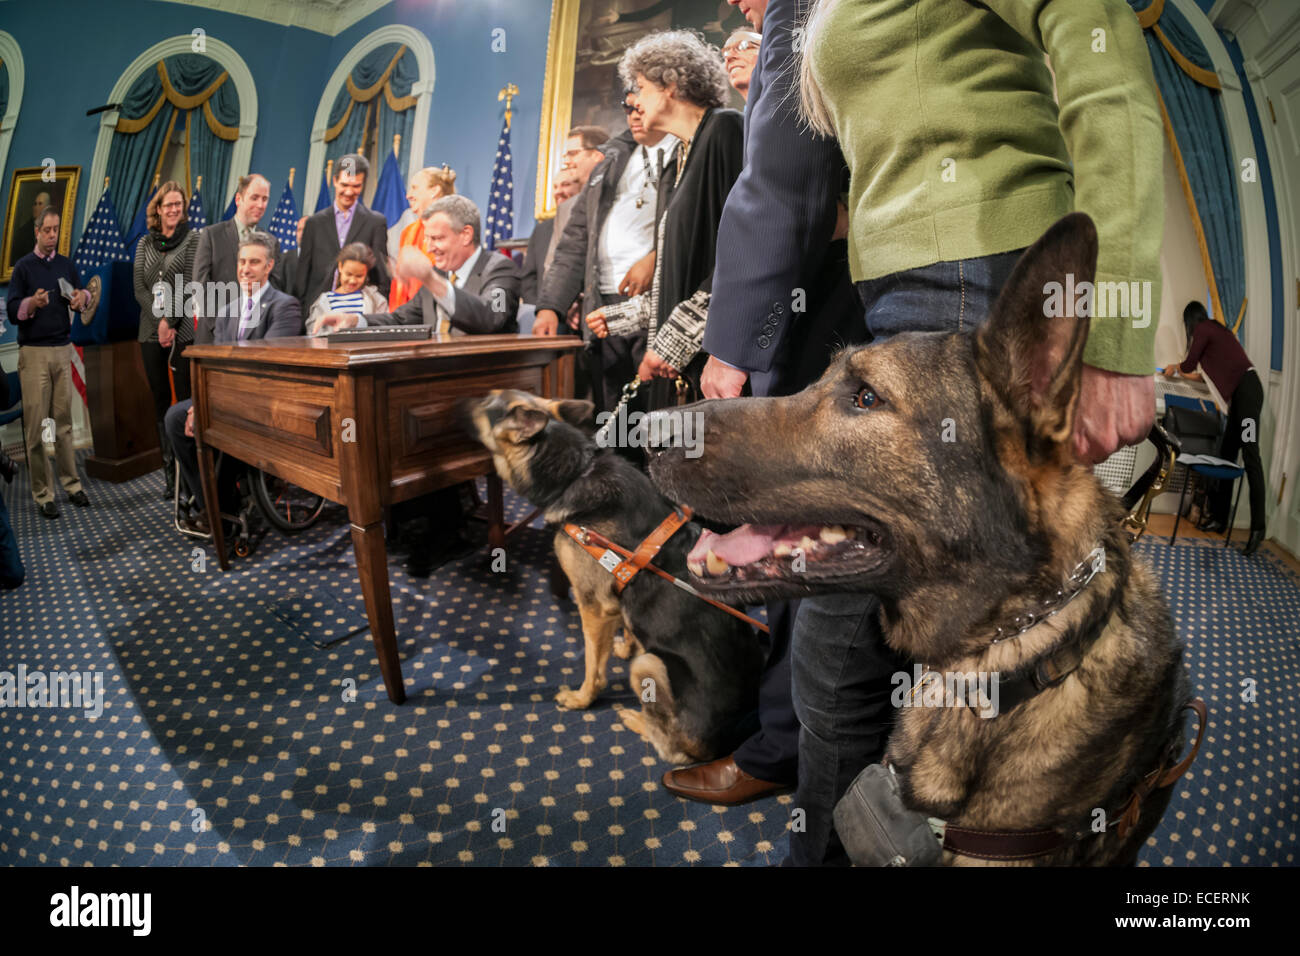 New York, USA. 12th December, 2014. Frisco, a service dog, rights, waits patiently with his owner as New York Mayor Bill De Blasio, at desk, signs into law Intro 216-B in the Blue Room at NY City Hall on Friday, December 12, 2014. The bill increases the pace of installation of Accessible Pedestrian Signals on city streets to enable people with visual impairments to maneuver intersections safely. Credit:  Richard Levine/Alamy Live News Stock Photo